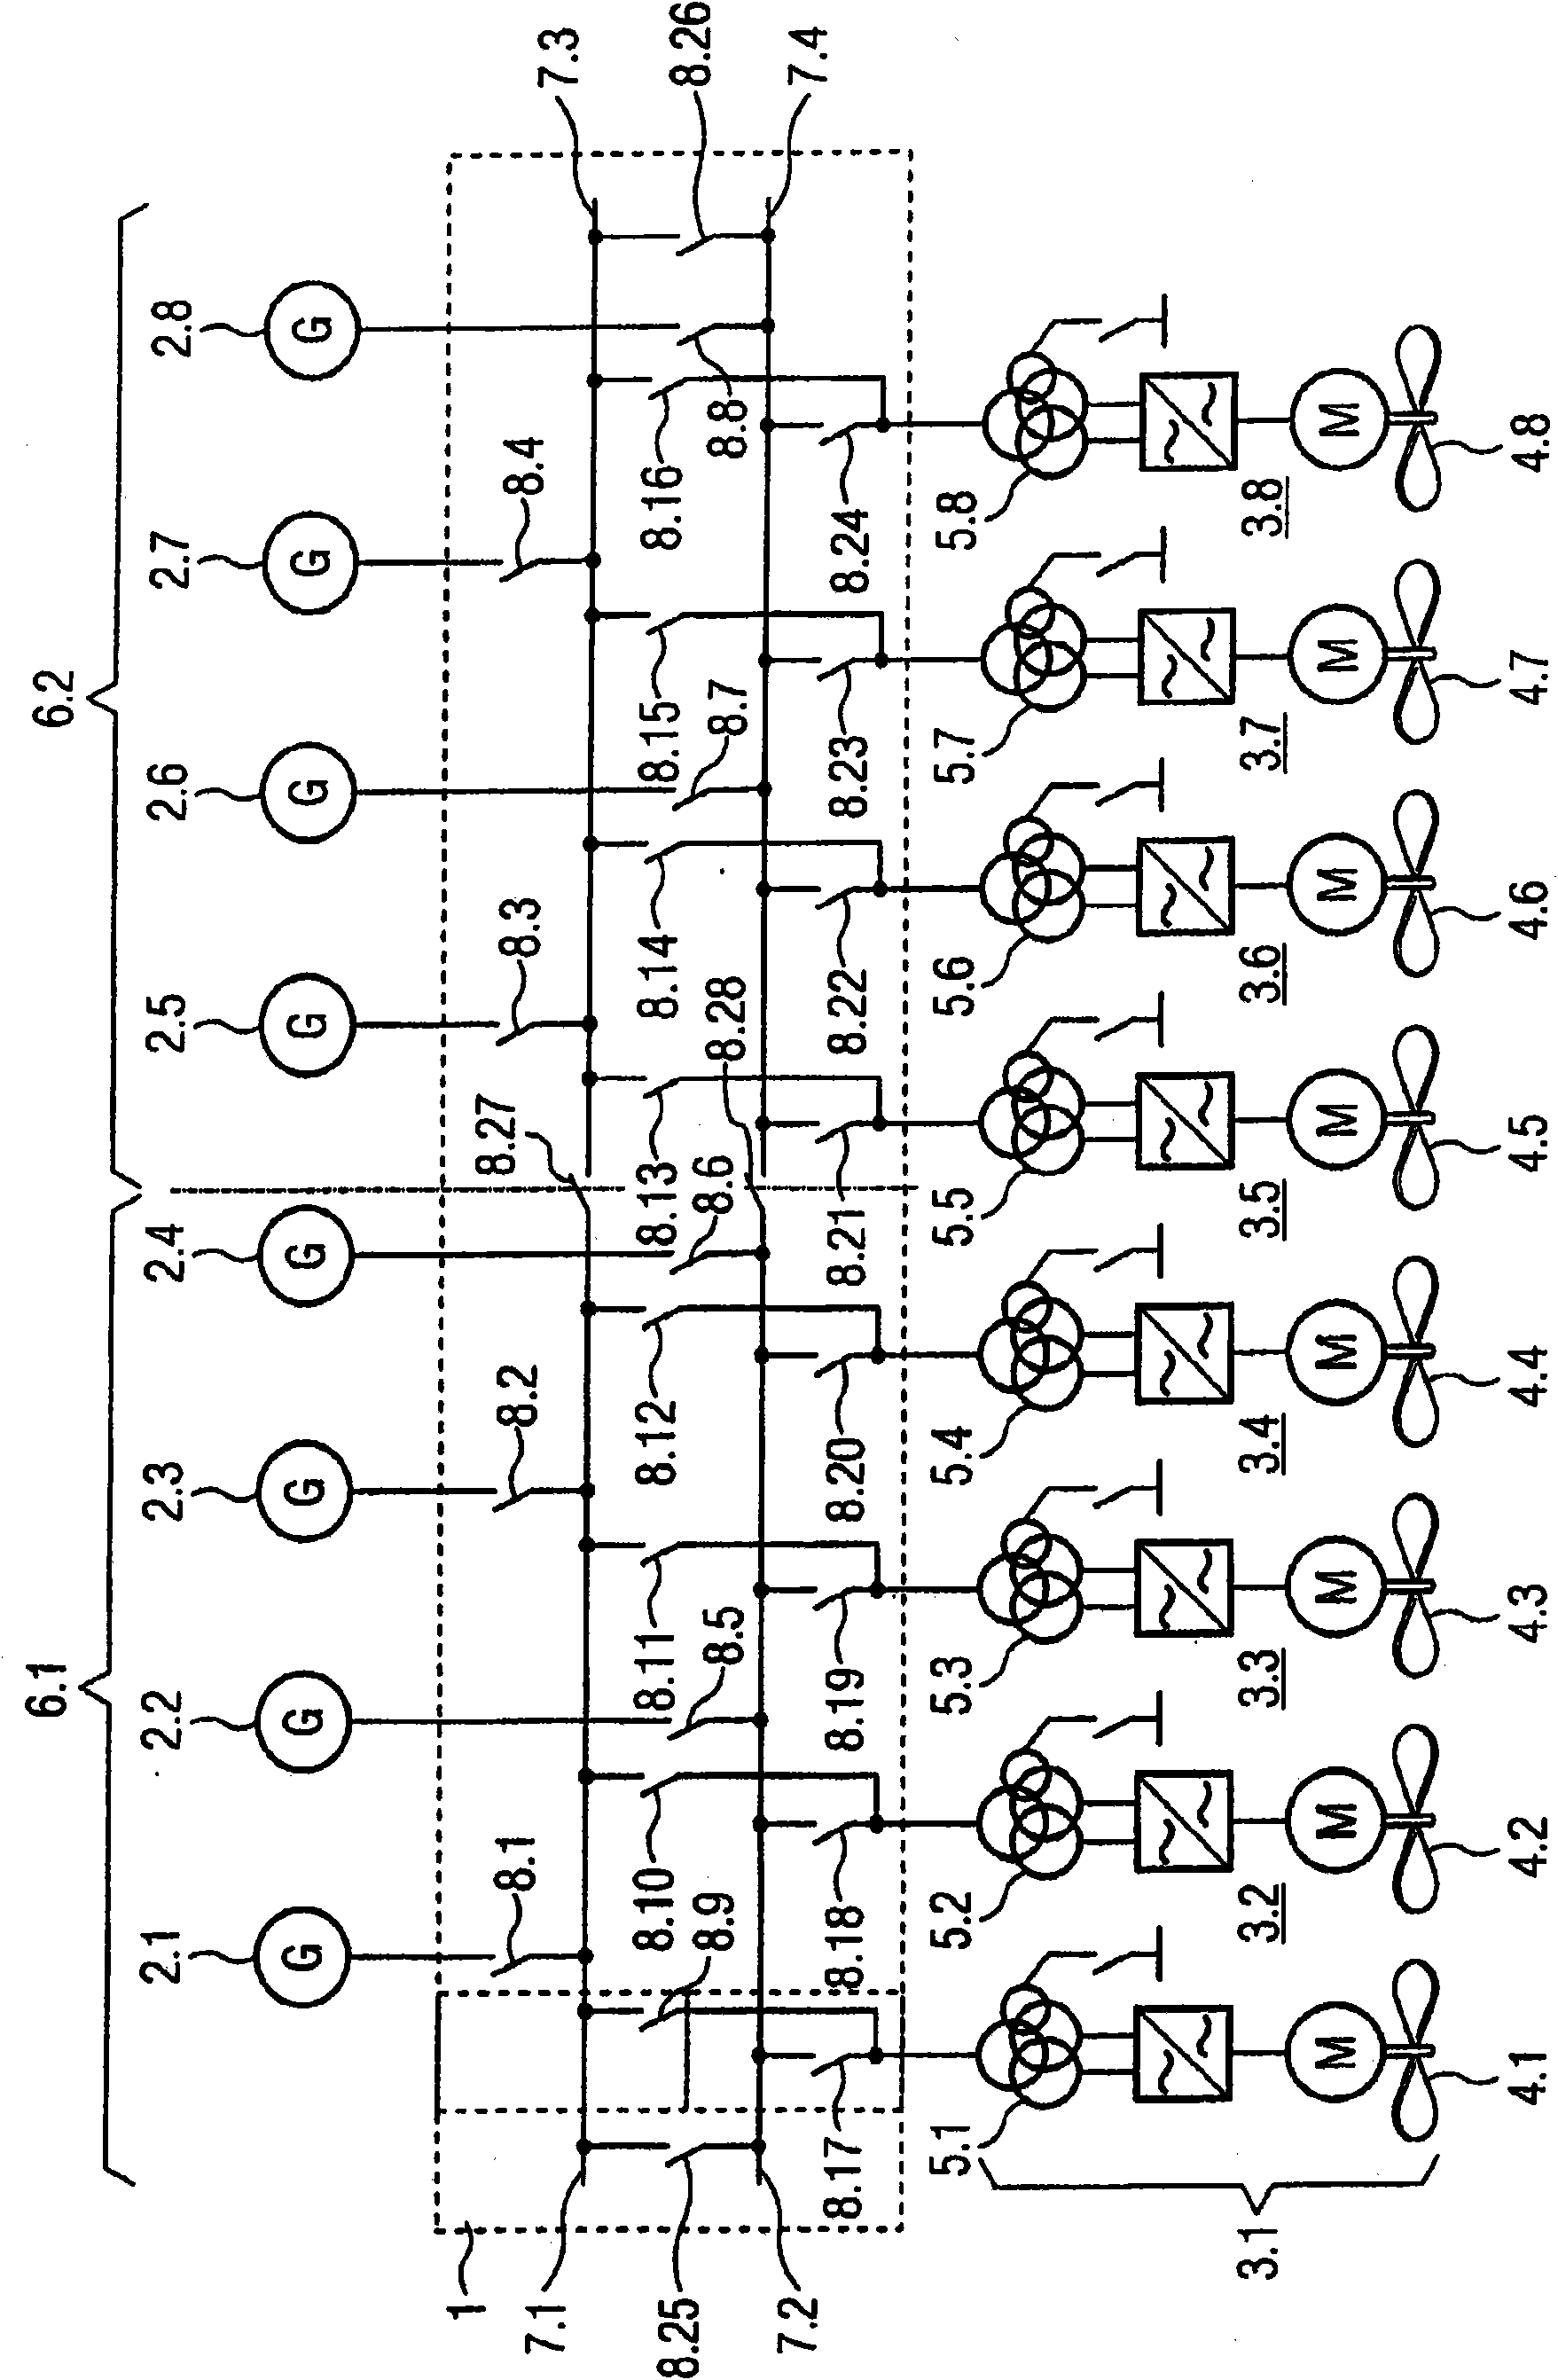 Electrical switchgear, particularly for connecting generators and thrusters in dynamically positioned vessels